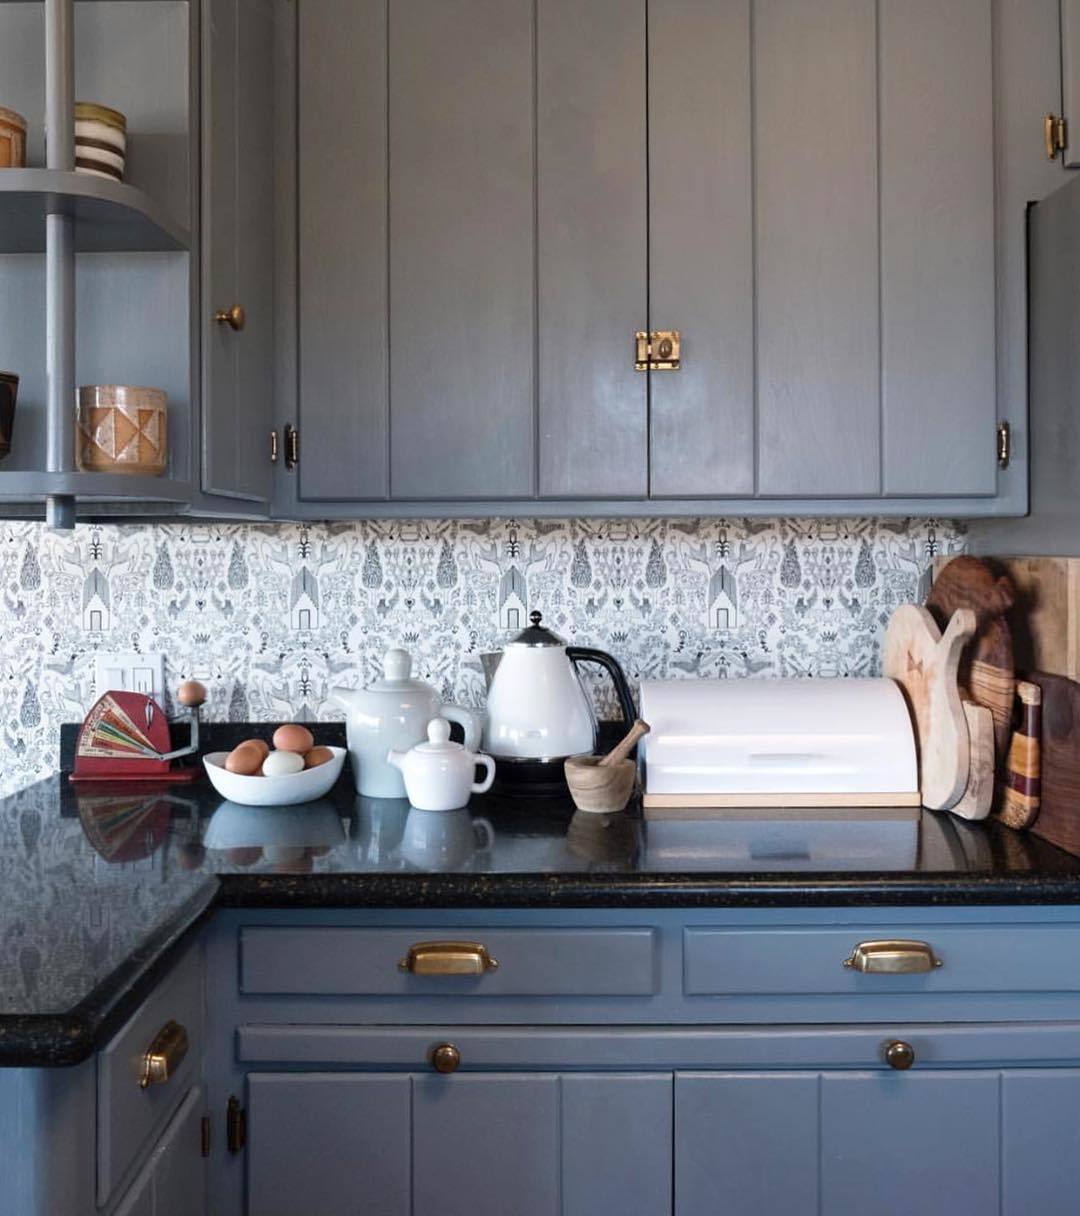 Our Favorite Patterns for the Kitchen | Nethercote Black wallpaper | Julia Rothman | Hygge & West